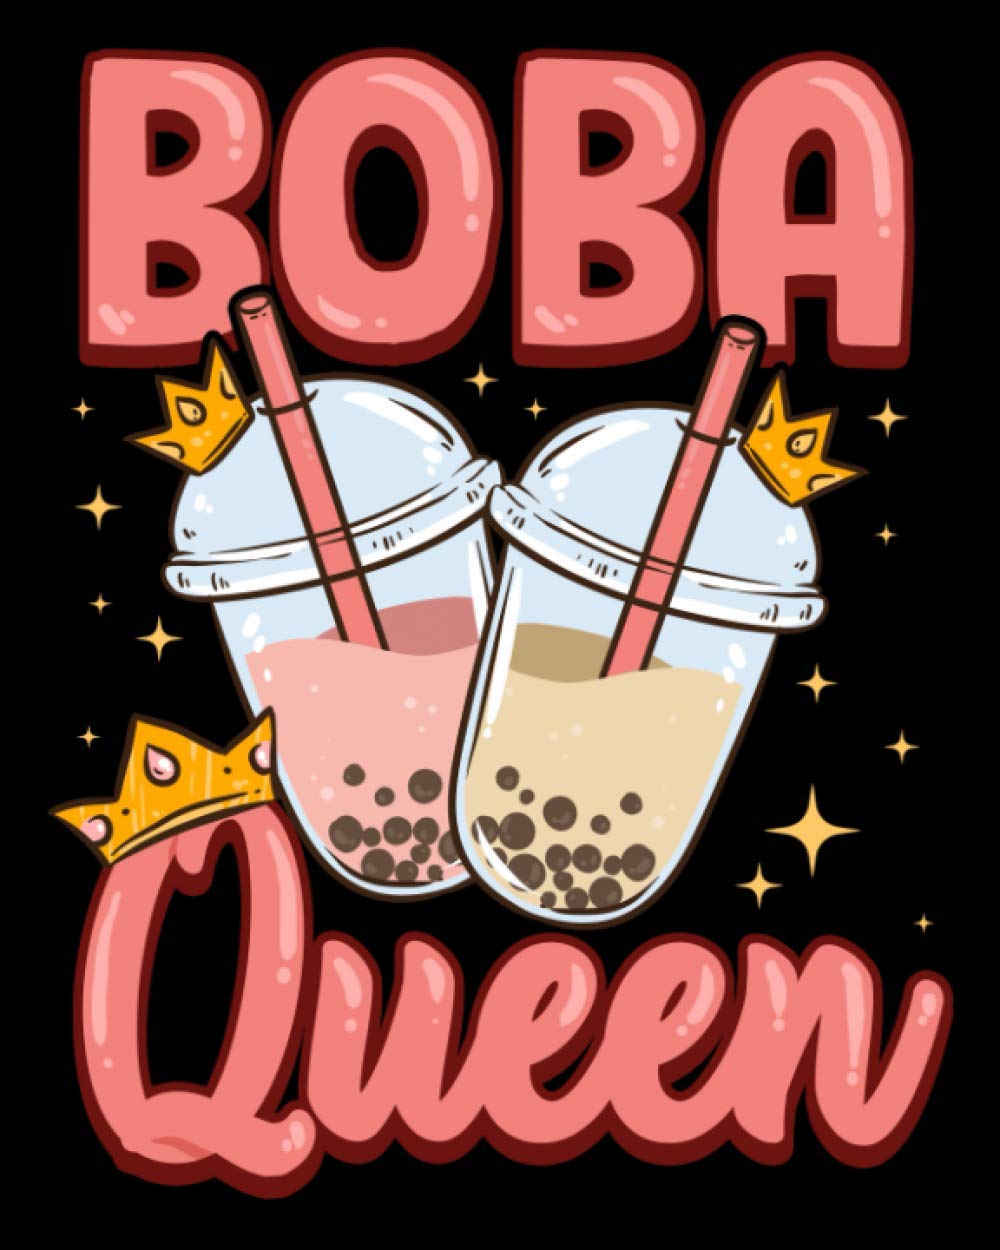 Boba Queen: Funny Boba Queen Kawaii Bubble Tea Boba Anime 2021 2022 Weekly Planner & Gratitude Journal (120 Pages, 8 X 10) Calender For Daily Notes, Thankfulness Reminders & To Do Lists: Planners